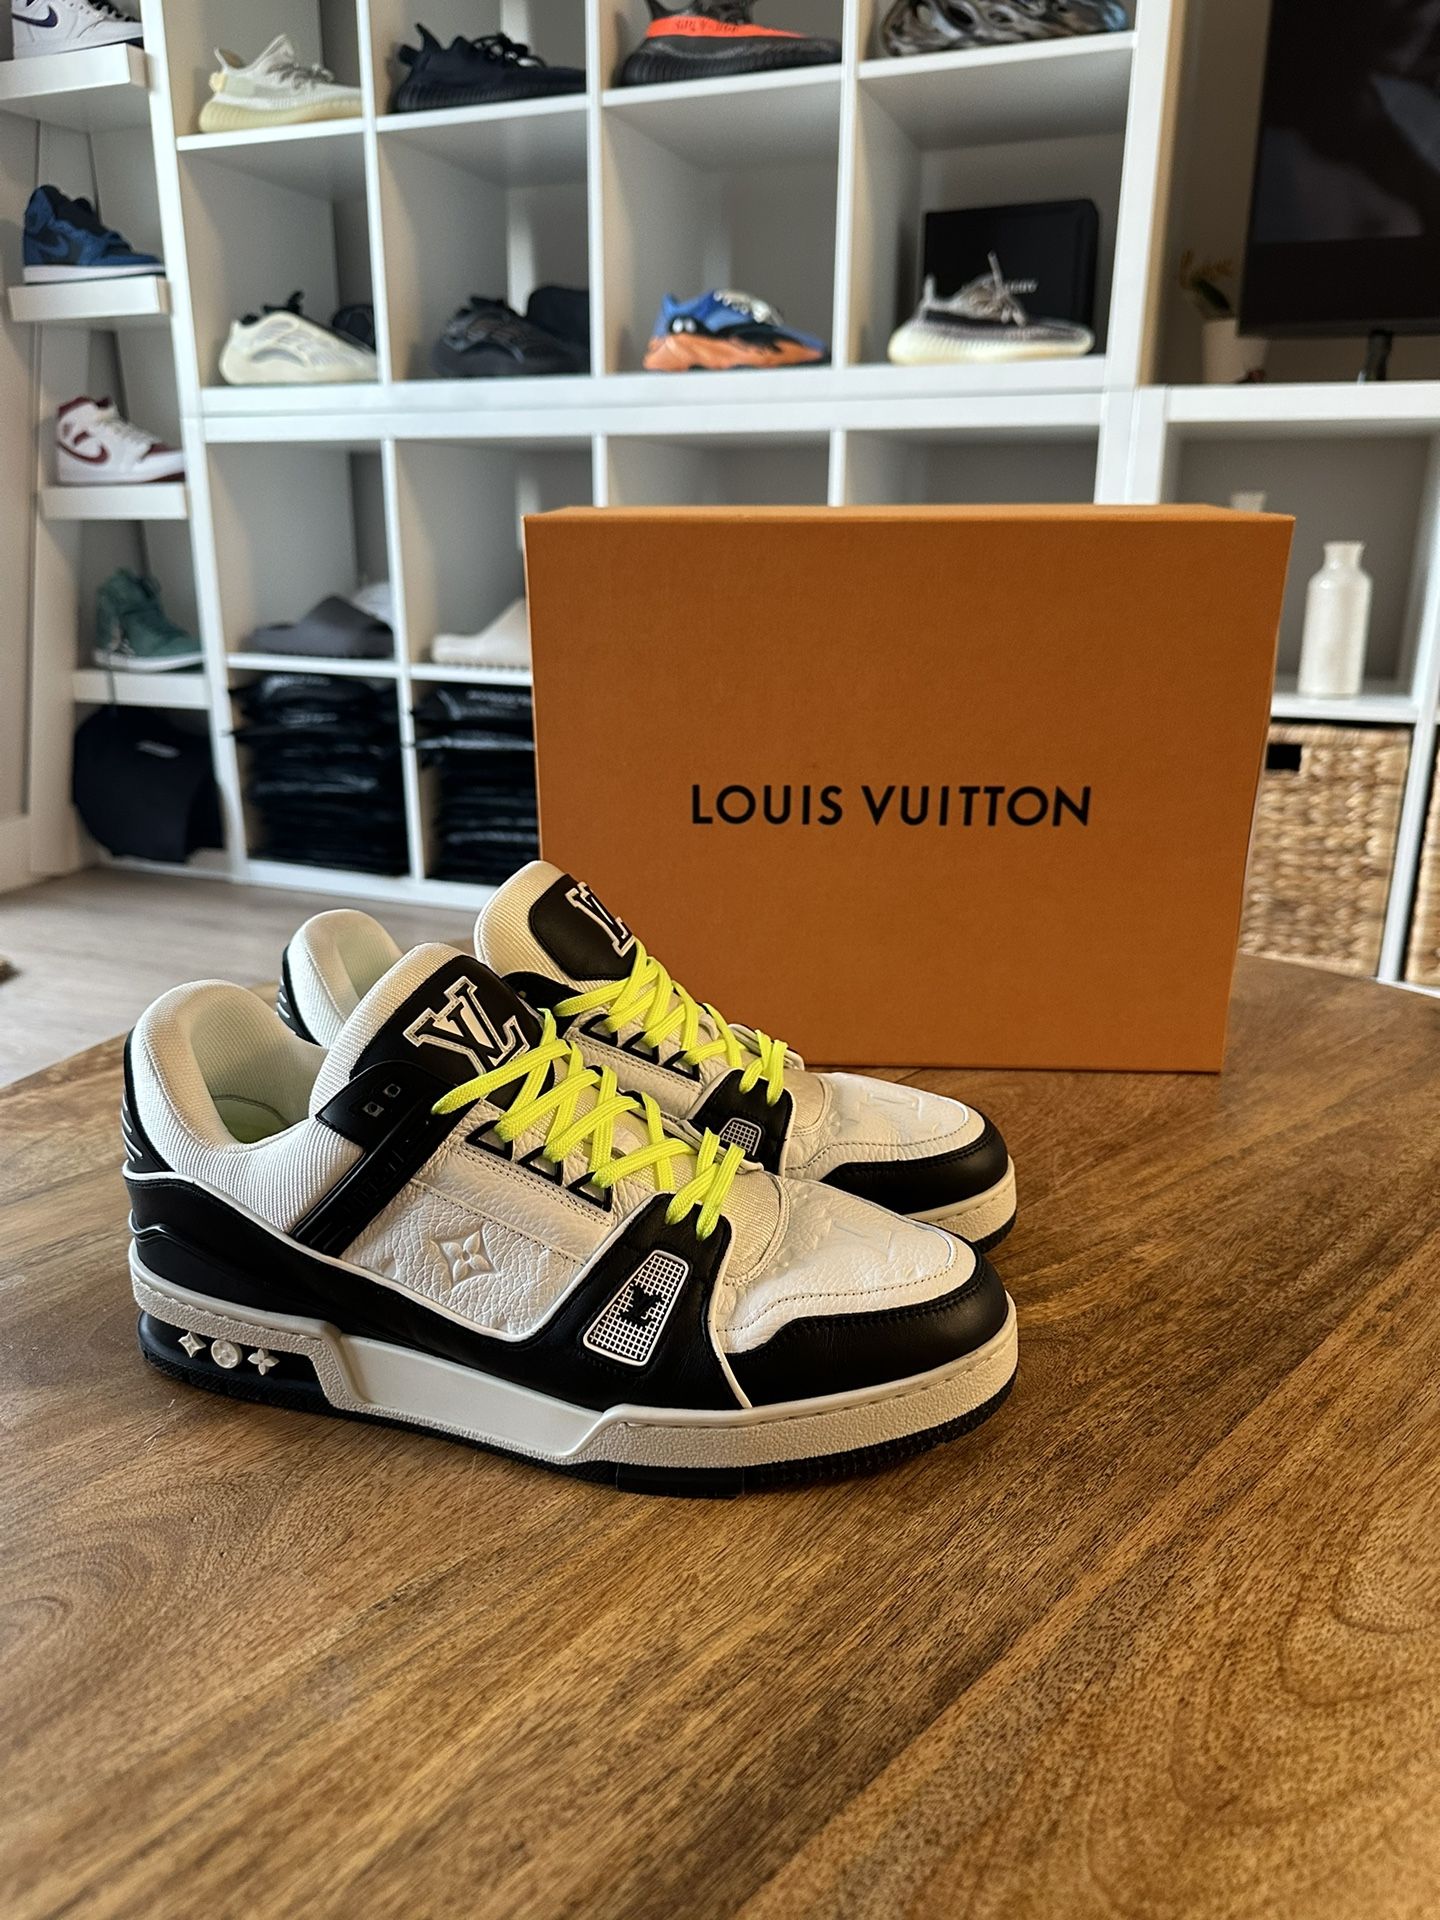 Louis Vuitton Lv Trainer Black & White Size 10 Pads for Sale in